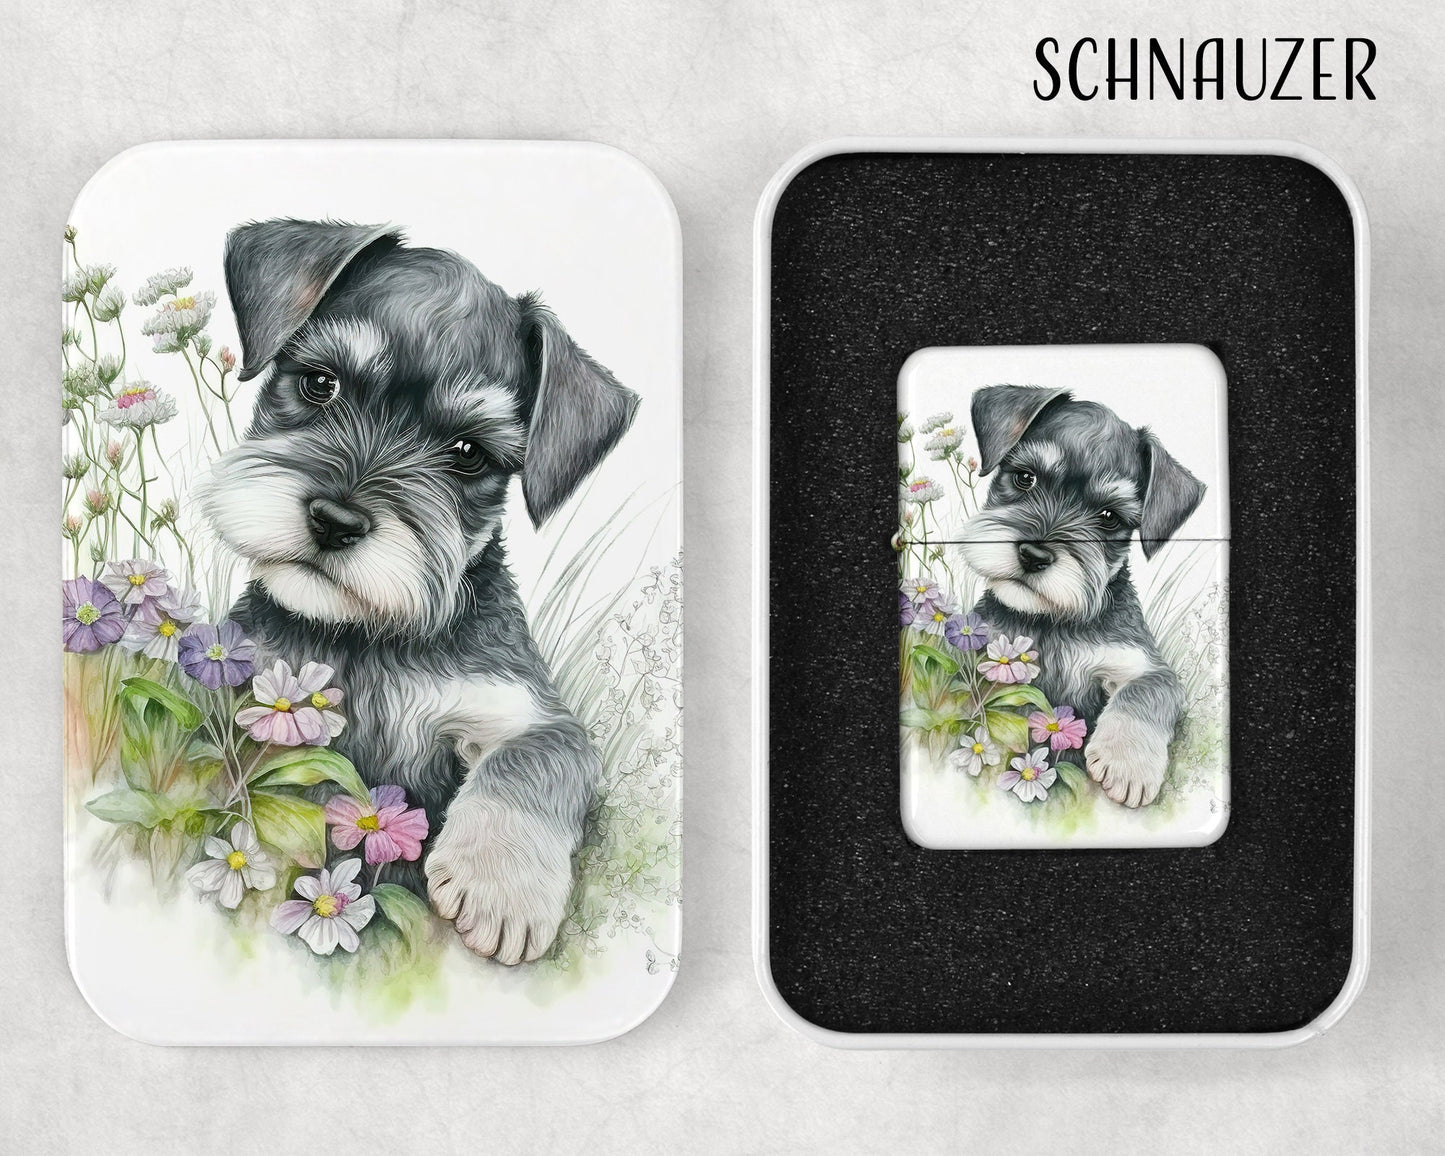 Cute Puppies Art Flip Top Lighter and Matching Gift Tin - Group 2 - 4 Design Choices